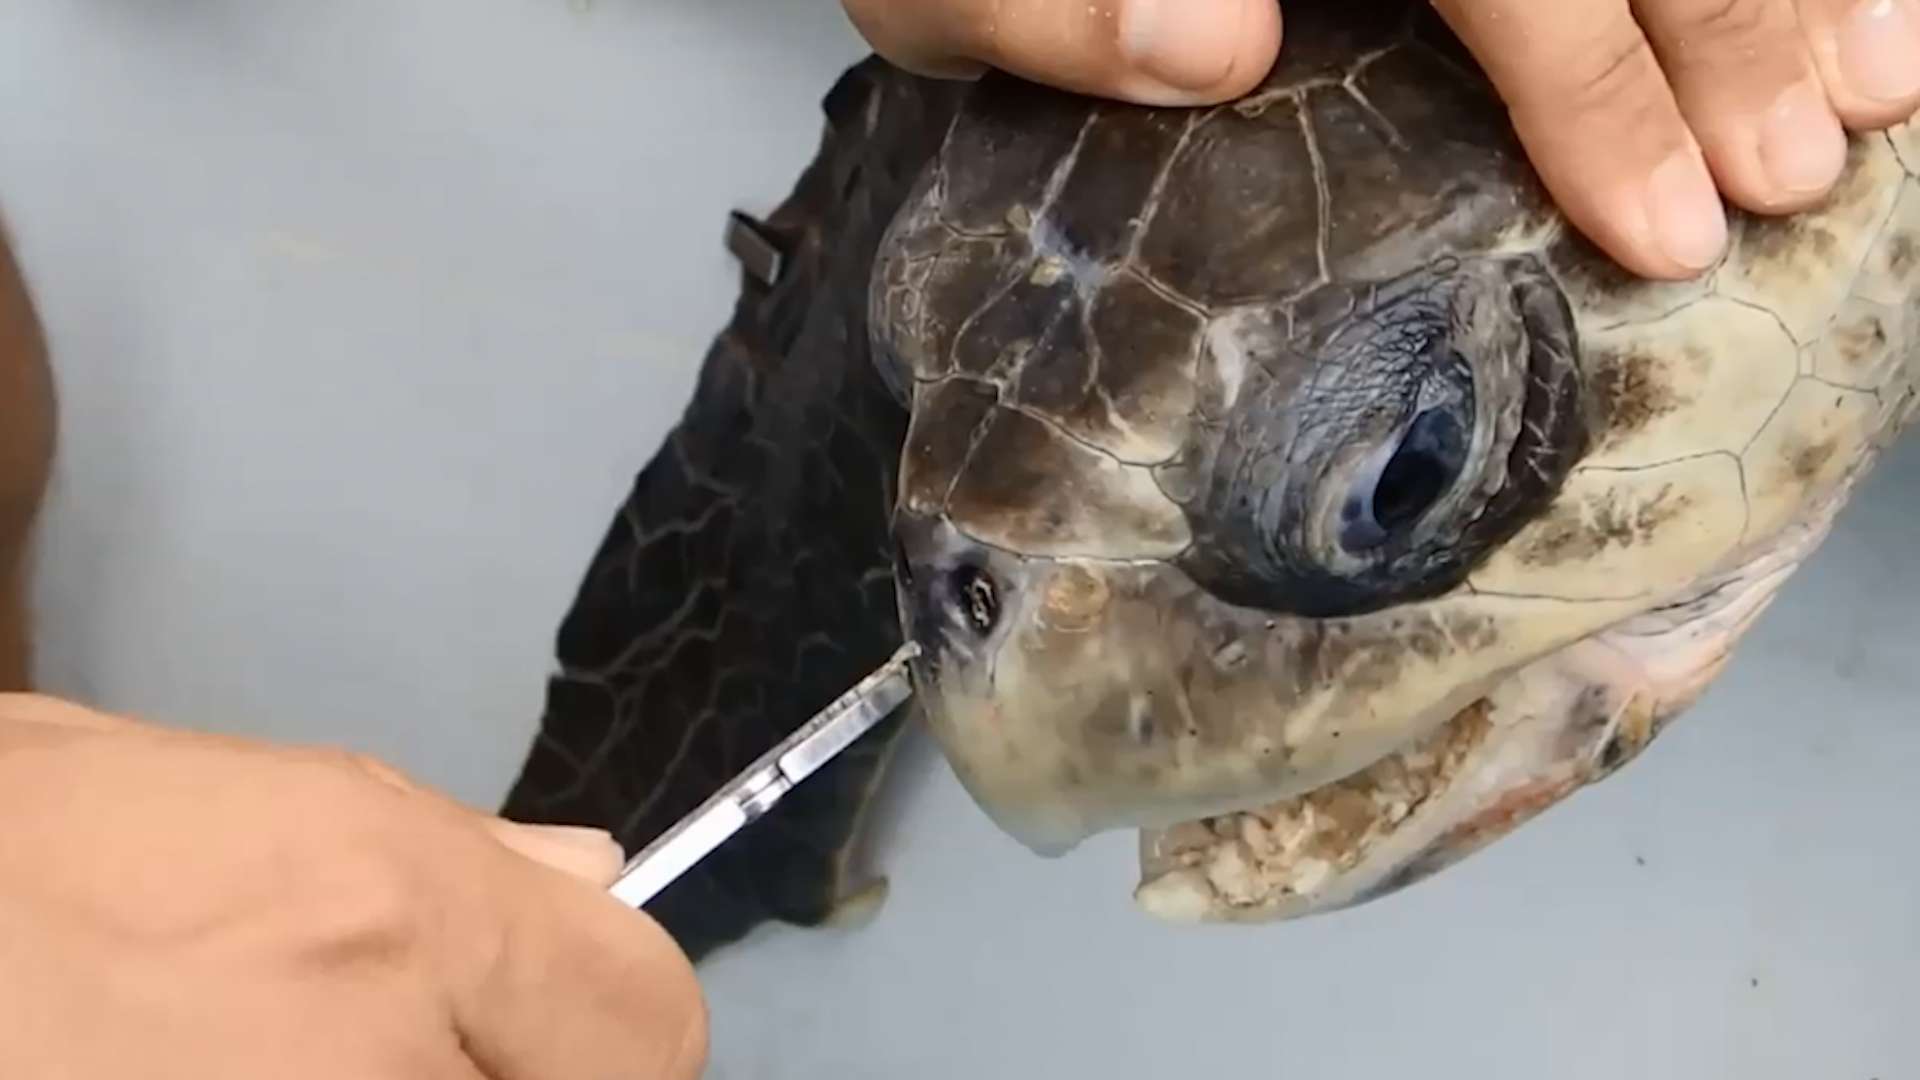 Report: Most Turtles Get Straws Stuck Up Nose While Attempting to Do Cocaine